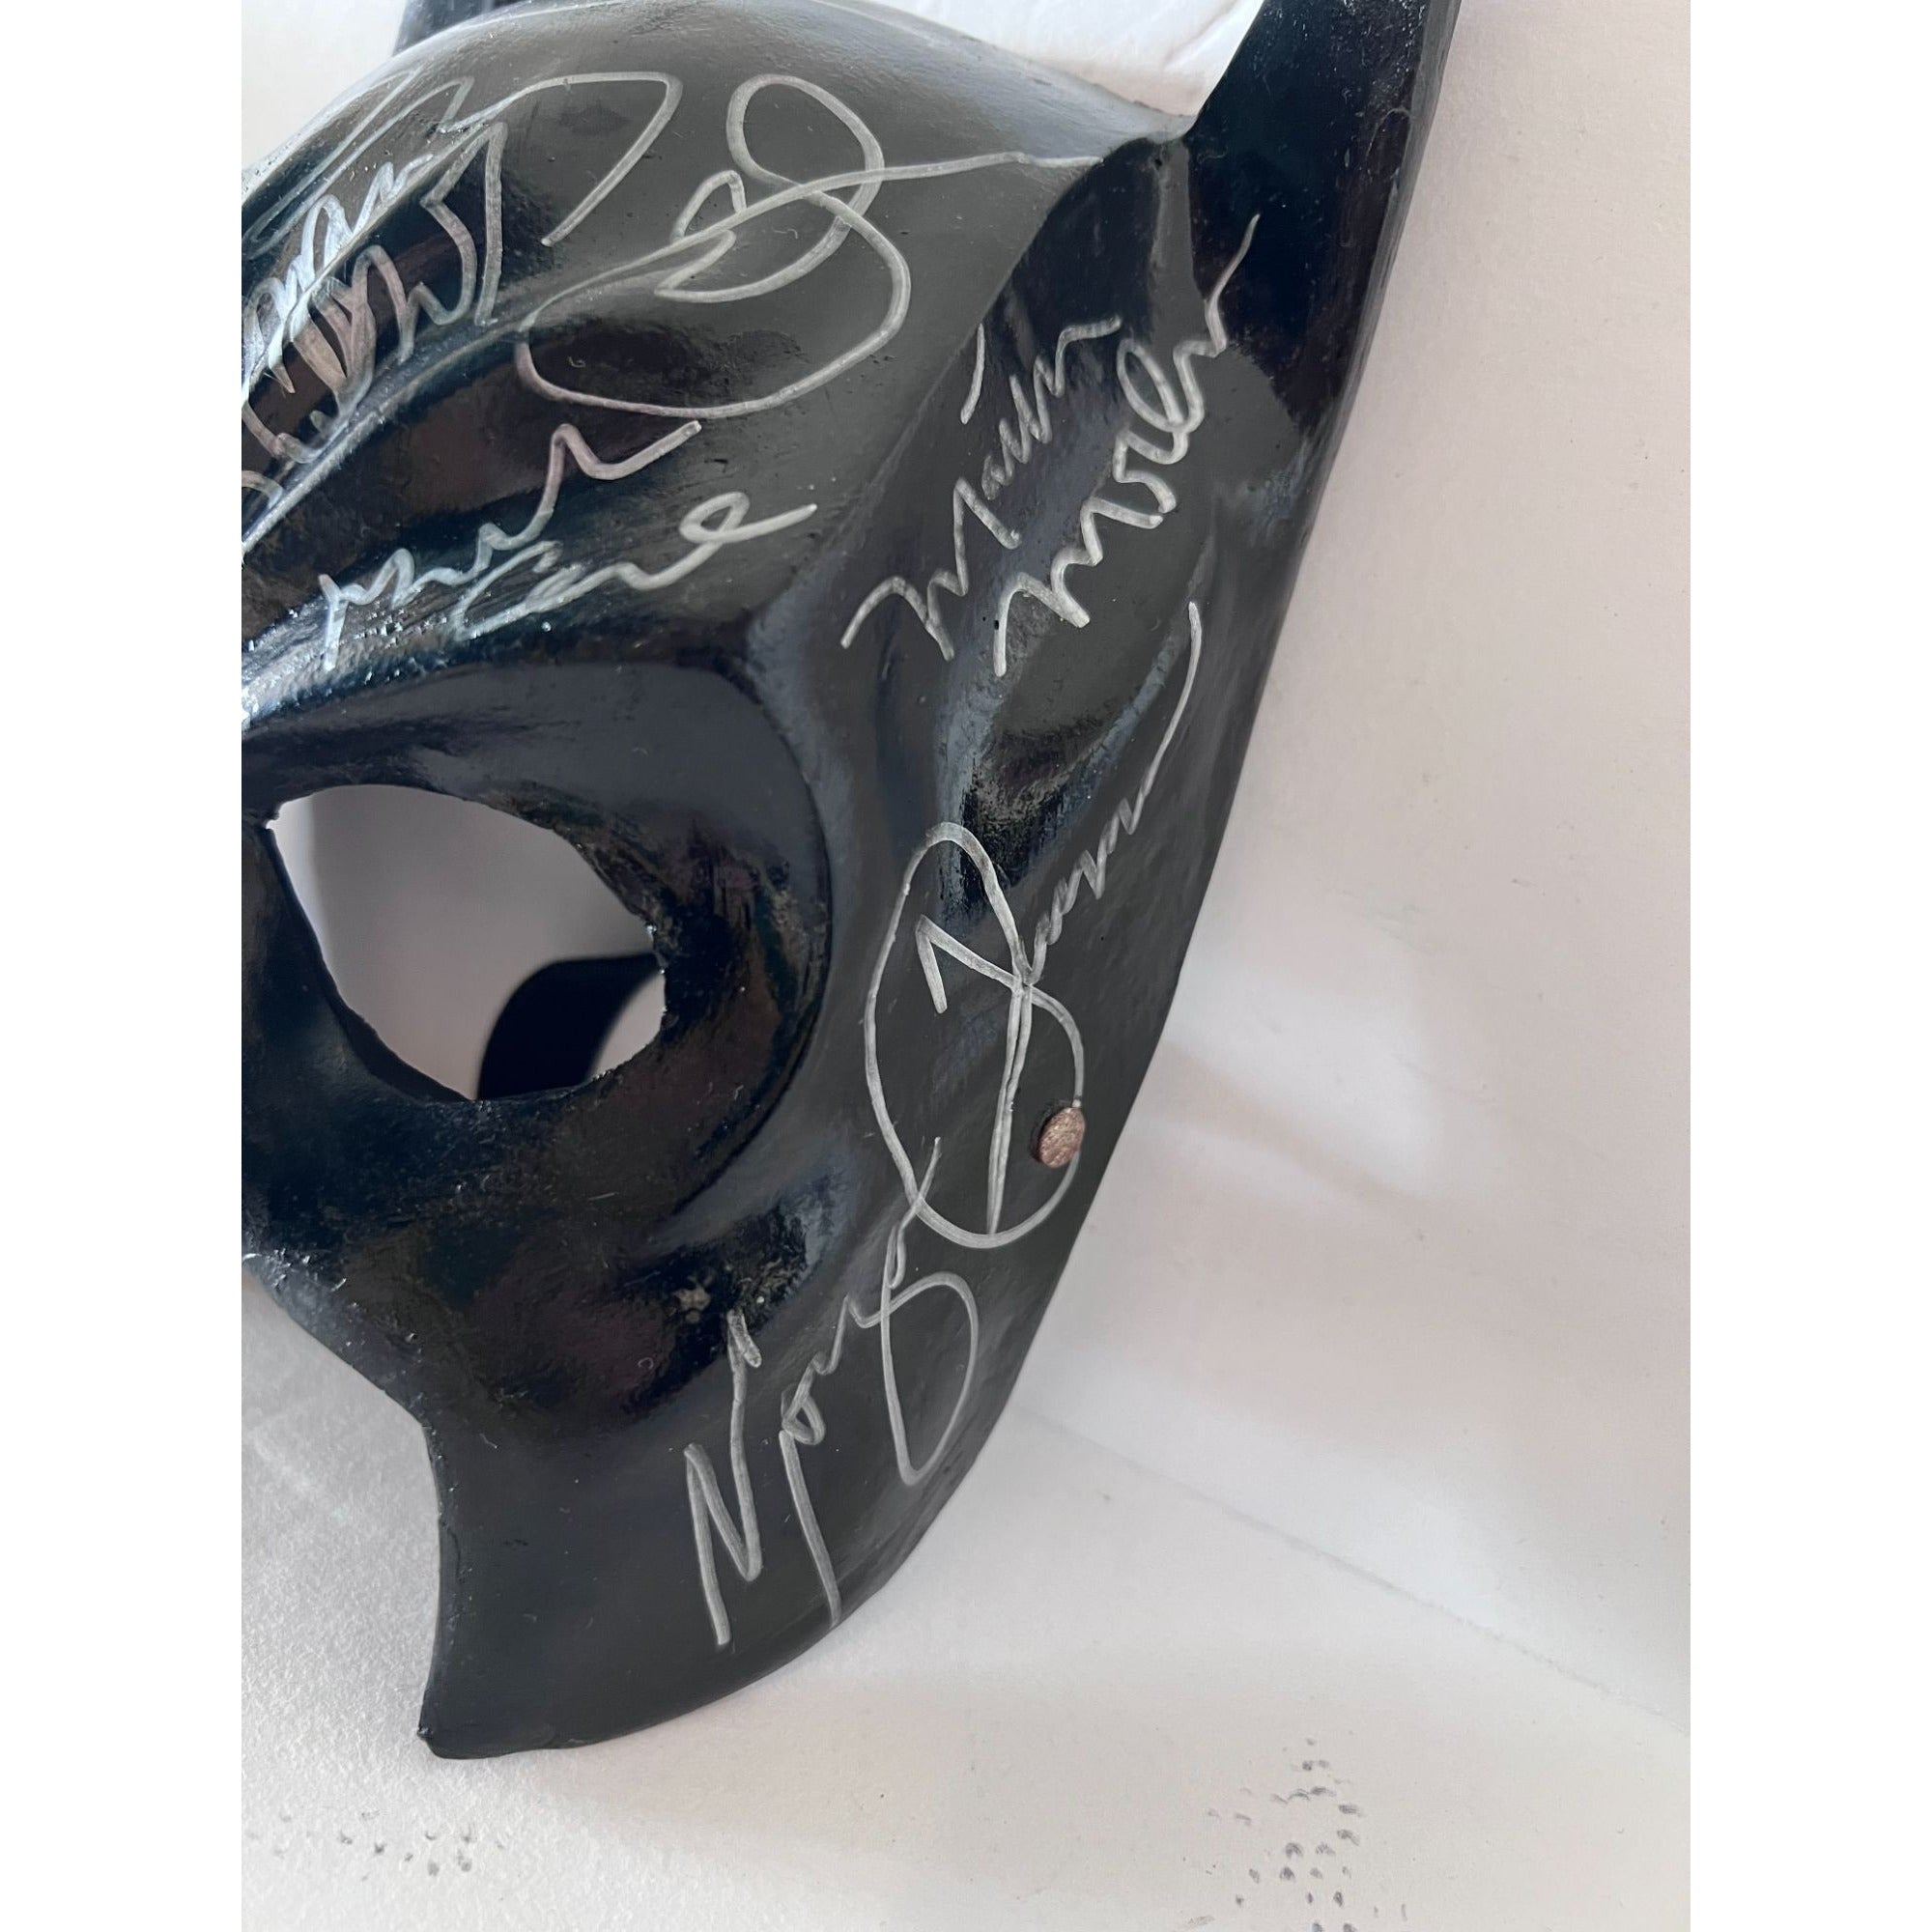 The Dark Knight Batman cast signed mask with proof he's Ledger Christian Bale Michael Caine Morgan Freeman